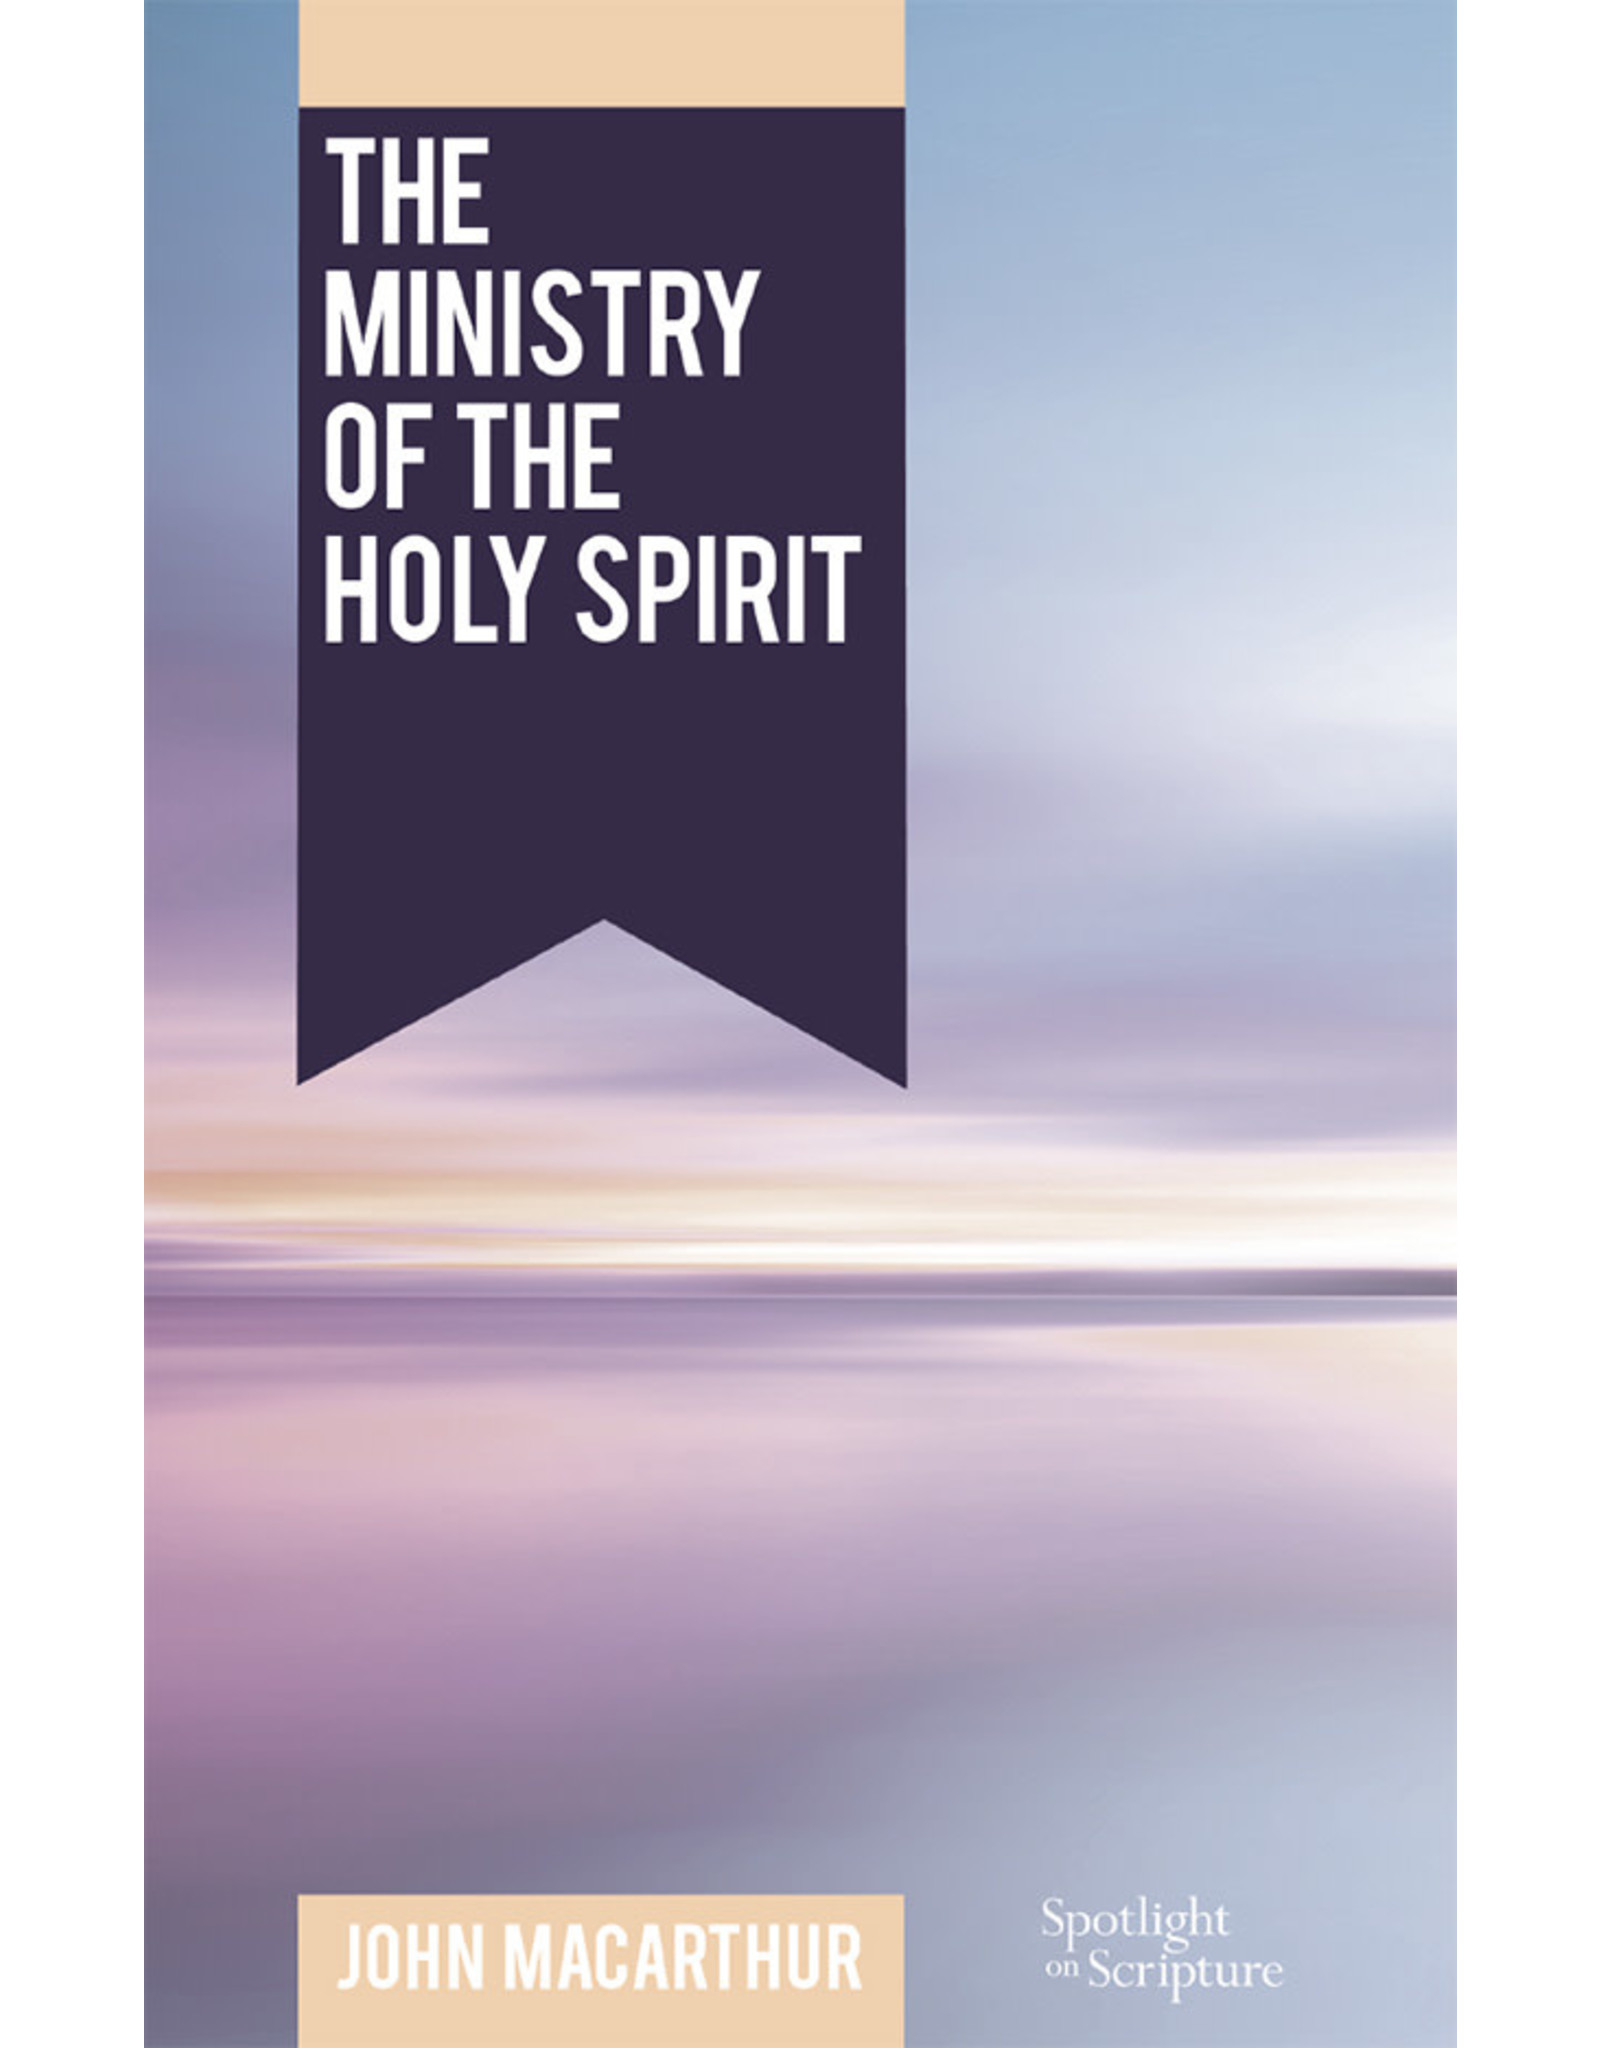 Grace to You (GTY) The Ministry Of The Holy Spirit (Booklet)